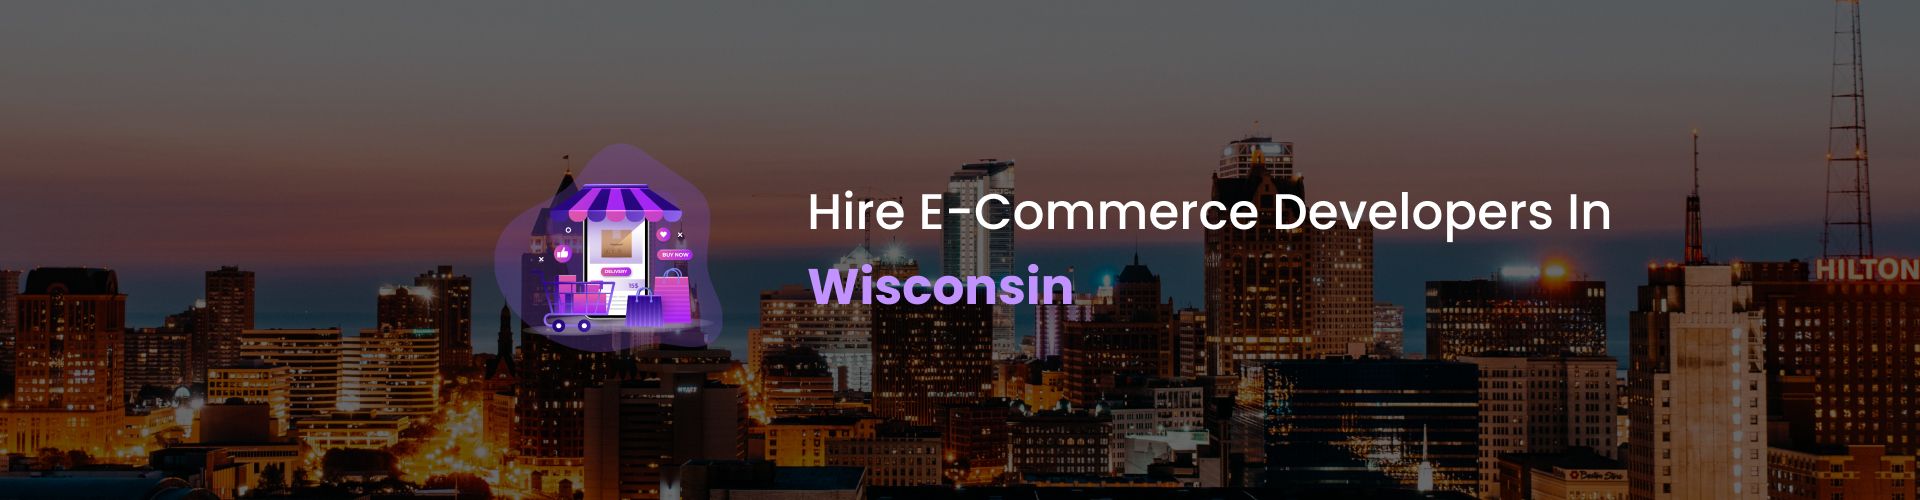 hire ecommerce developers in wisconsin